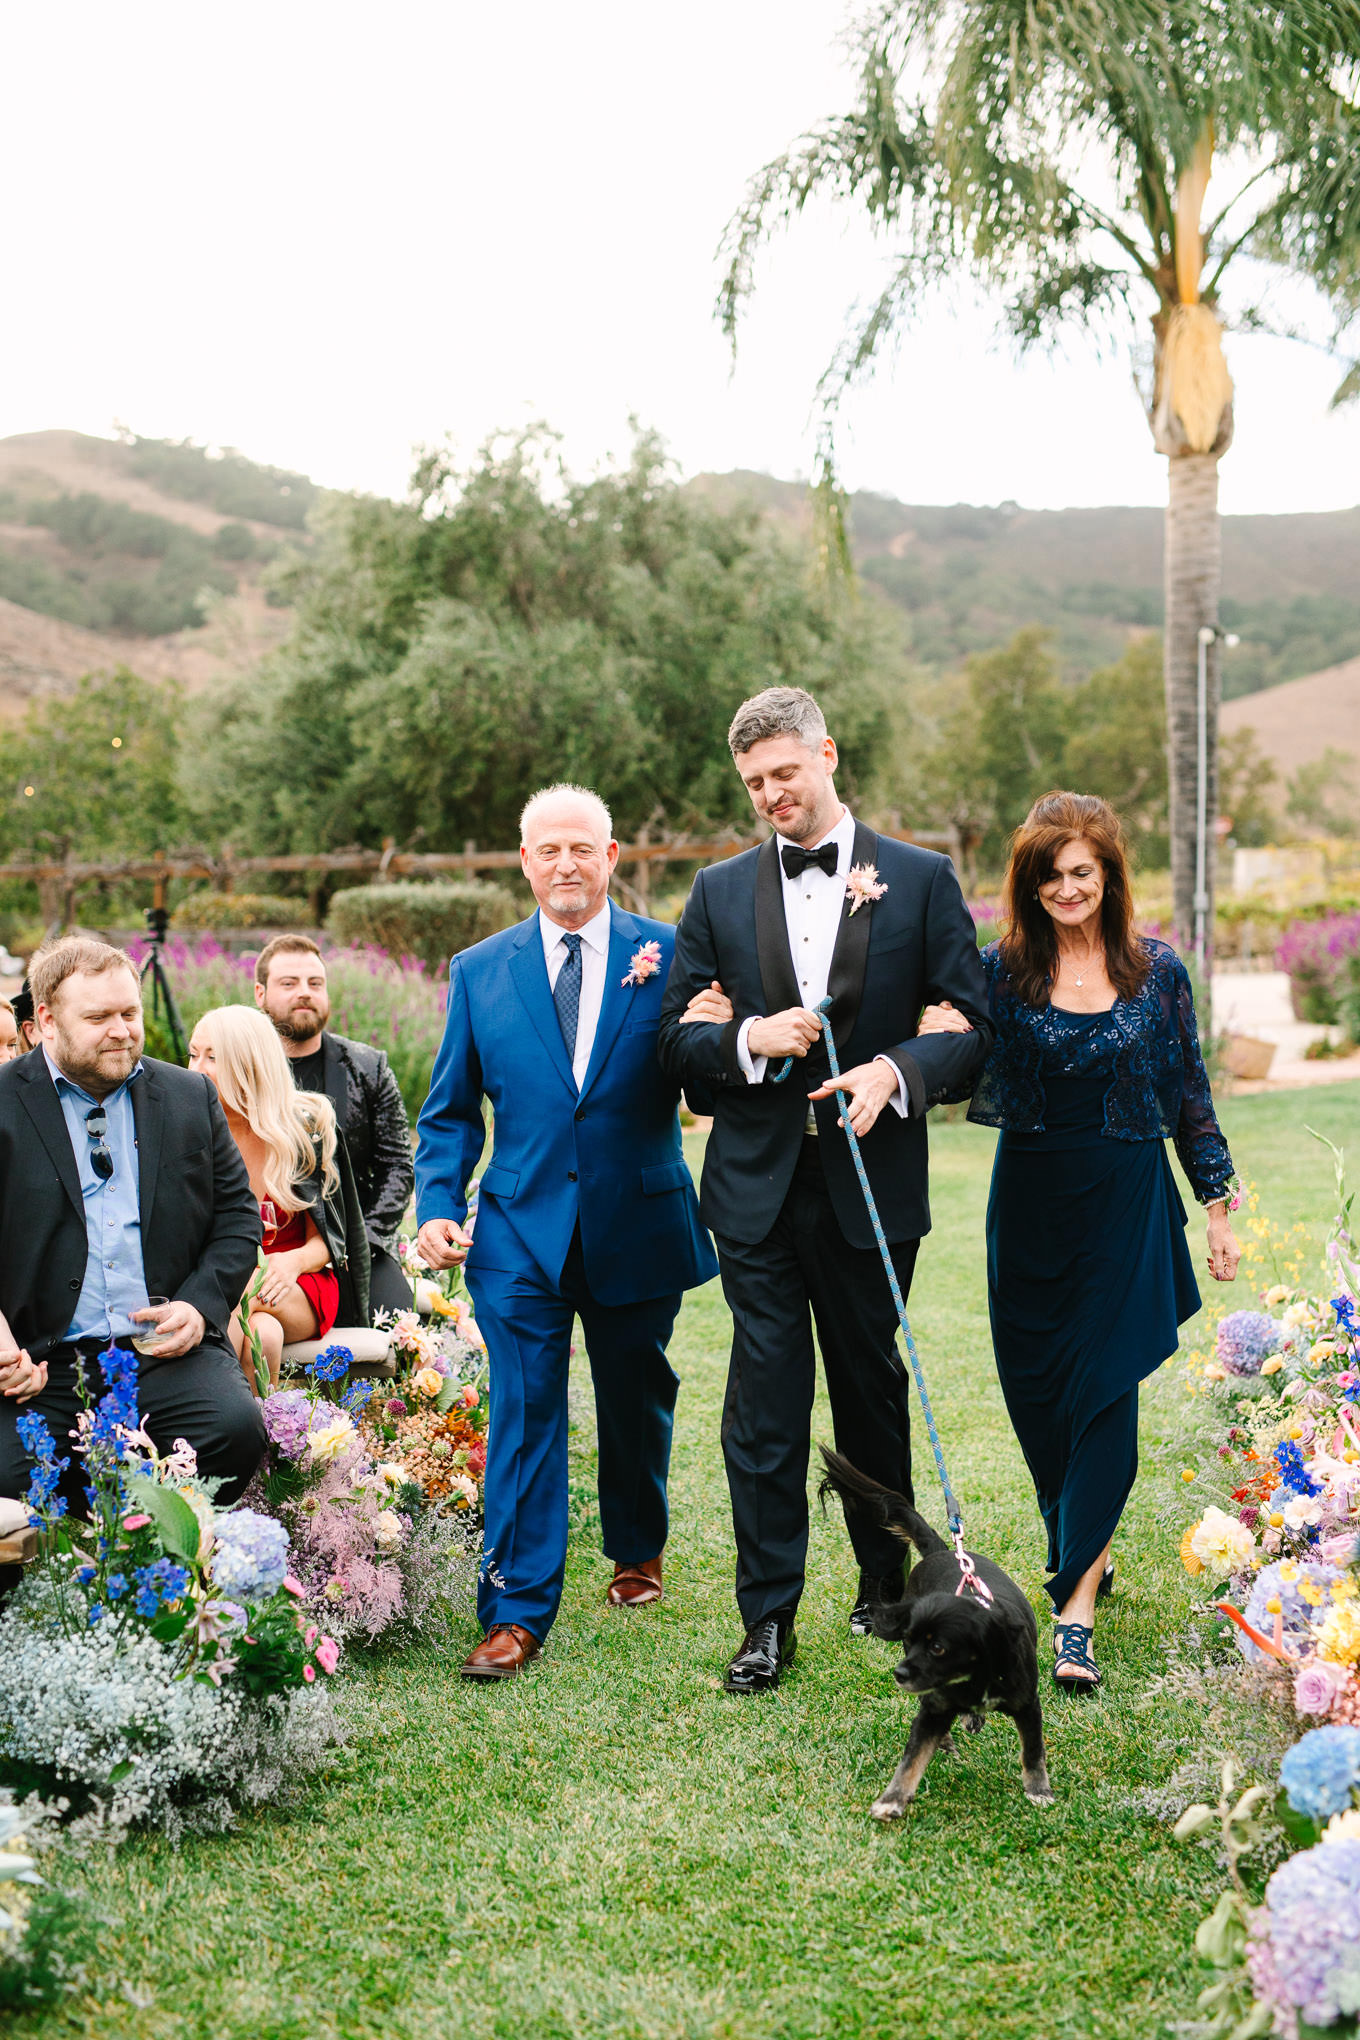 Groom walking with parents and dog at wedding ceremony | Colorful and quirky wedding at Higuera Ranch in San Luis Obispo | #sanluisobispowedding #californiawedding #higueraranch #madonnainn   Source: Mary Costa Photography | Los Angeles